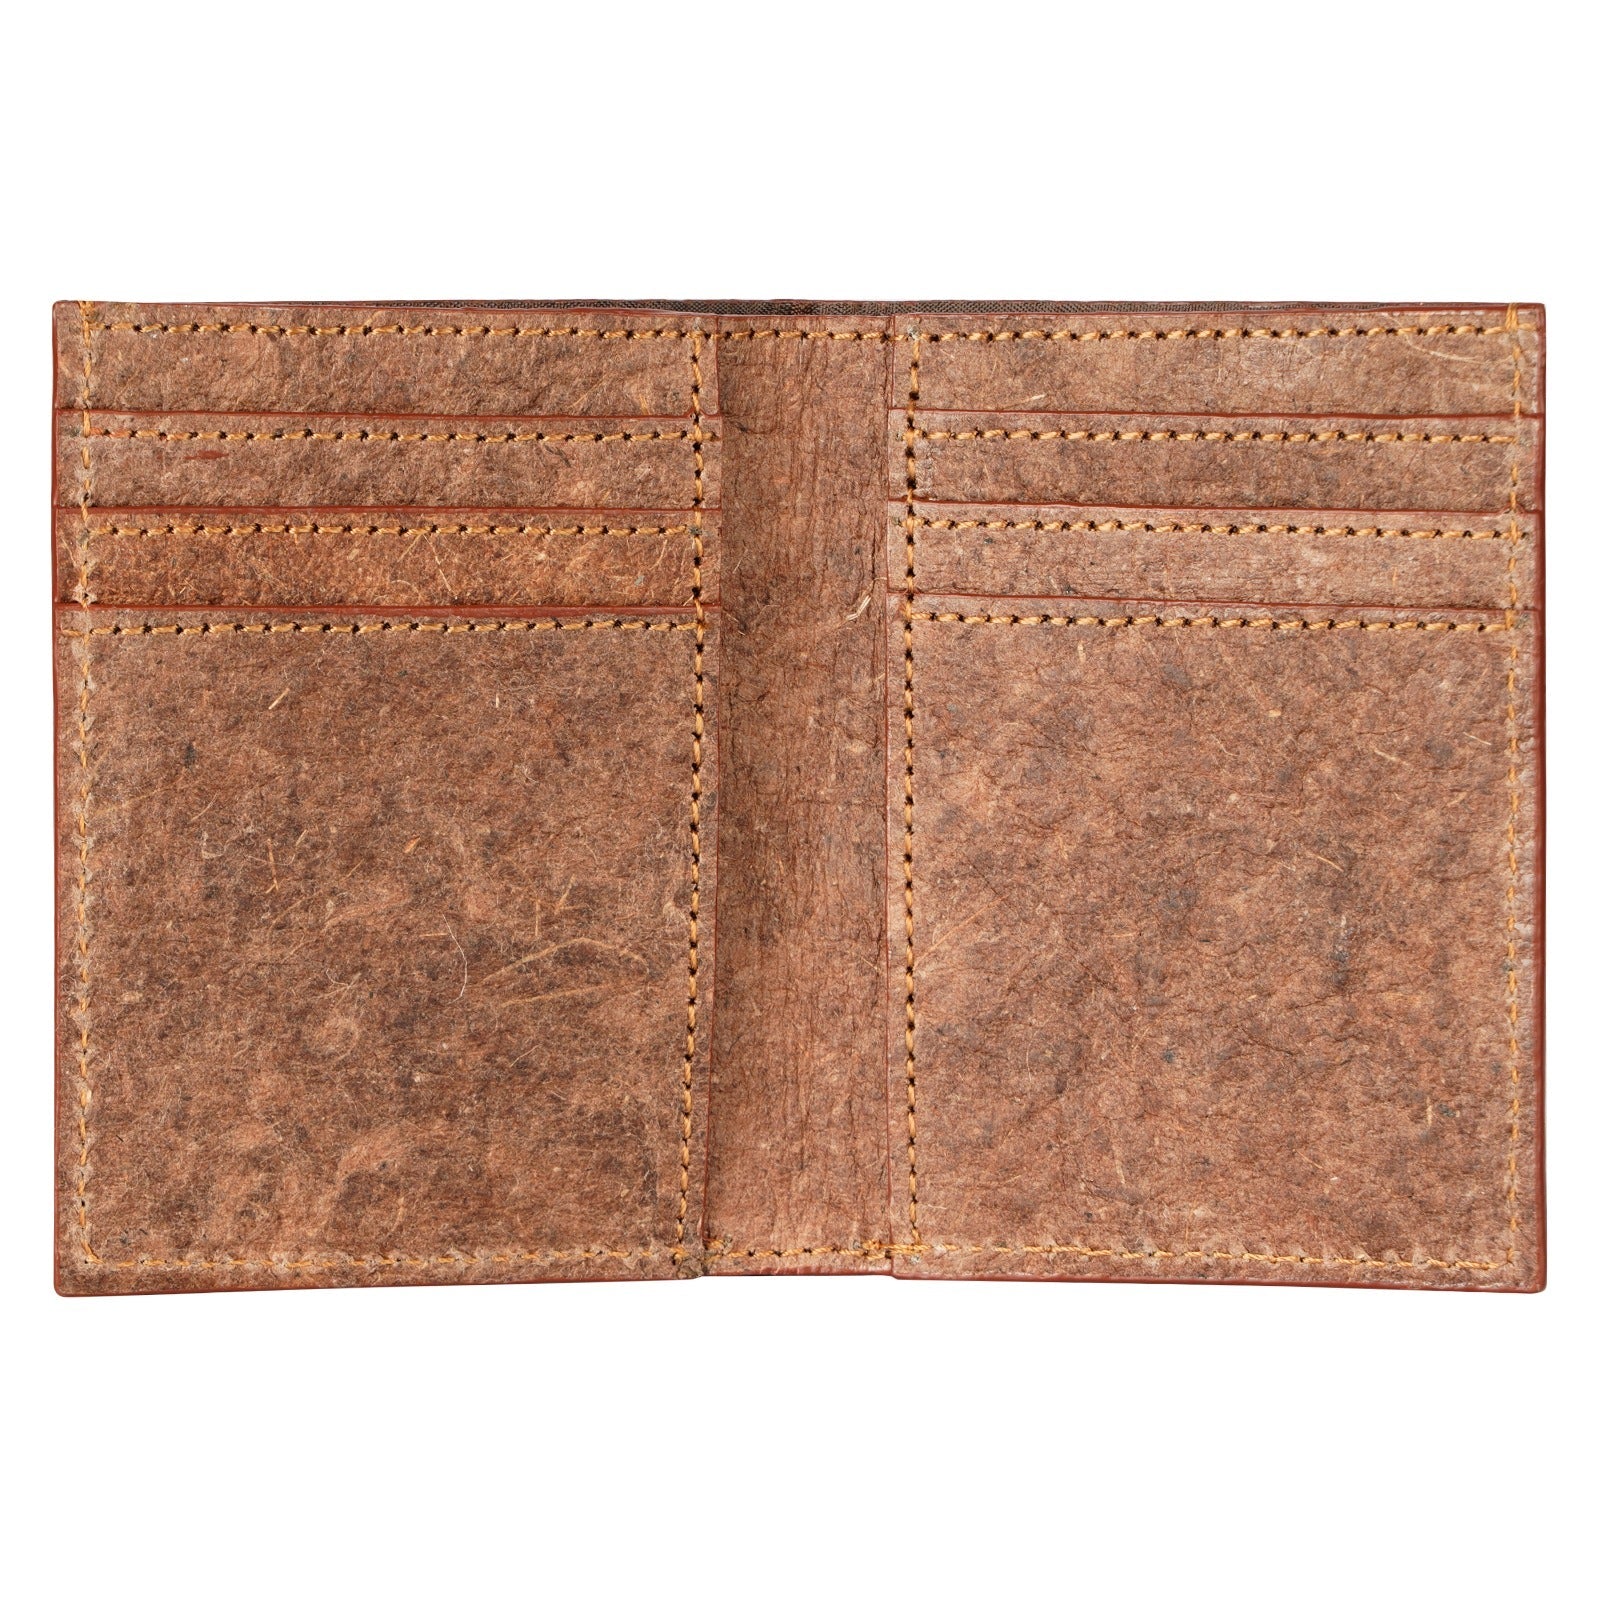 Coconut Leather Classic Wallet - Cutch Brown-1